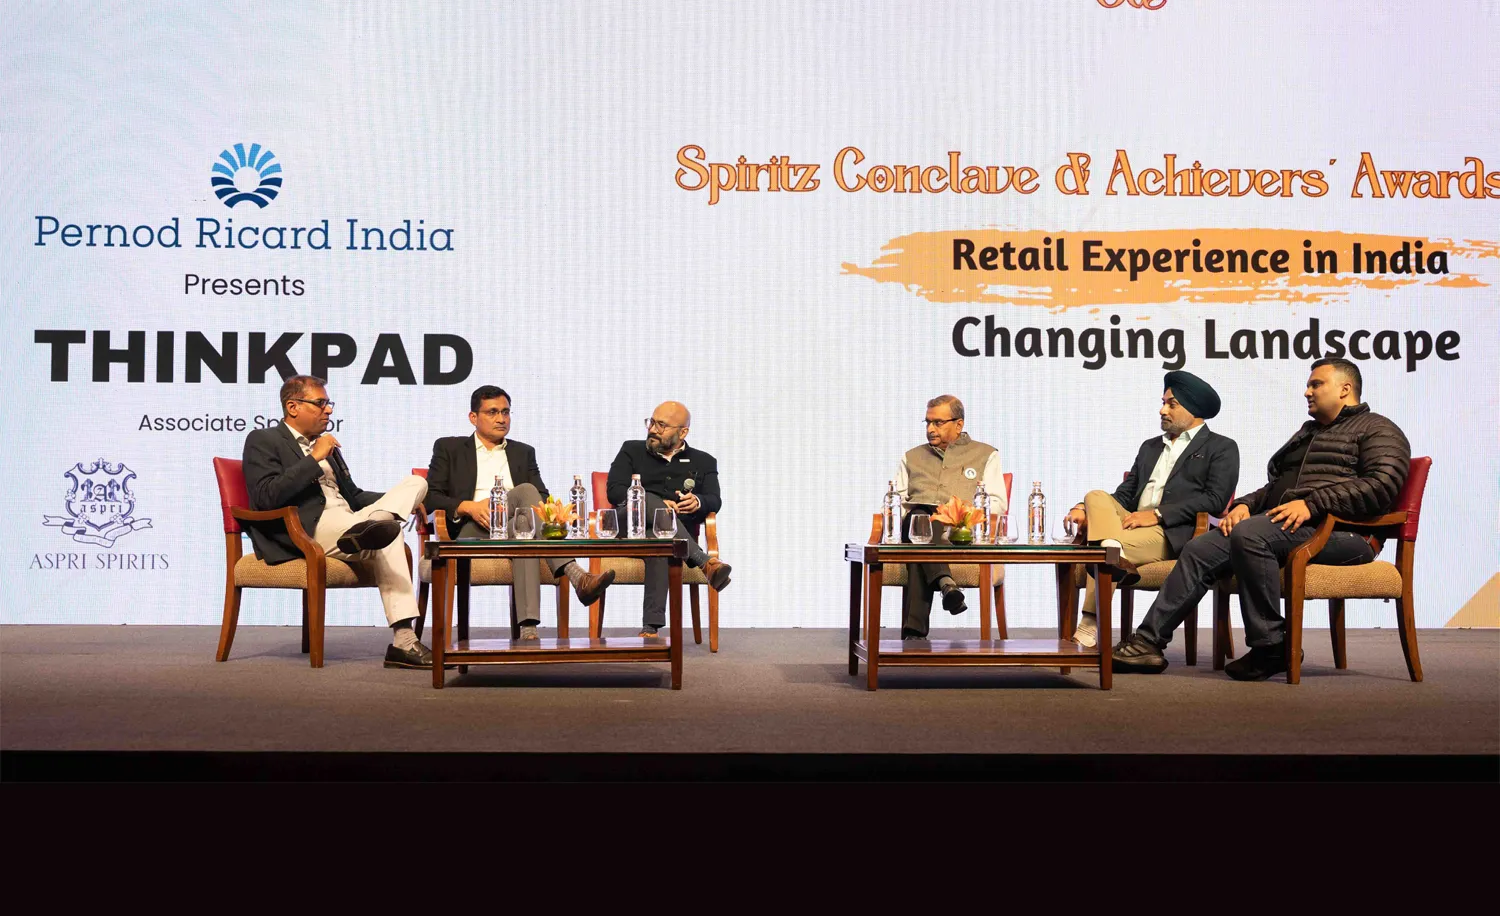 Retail Experience in India: Changing Landscape